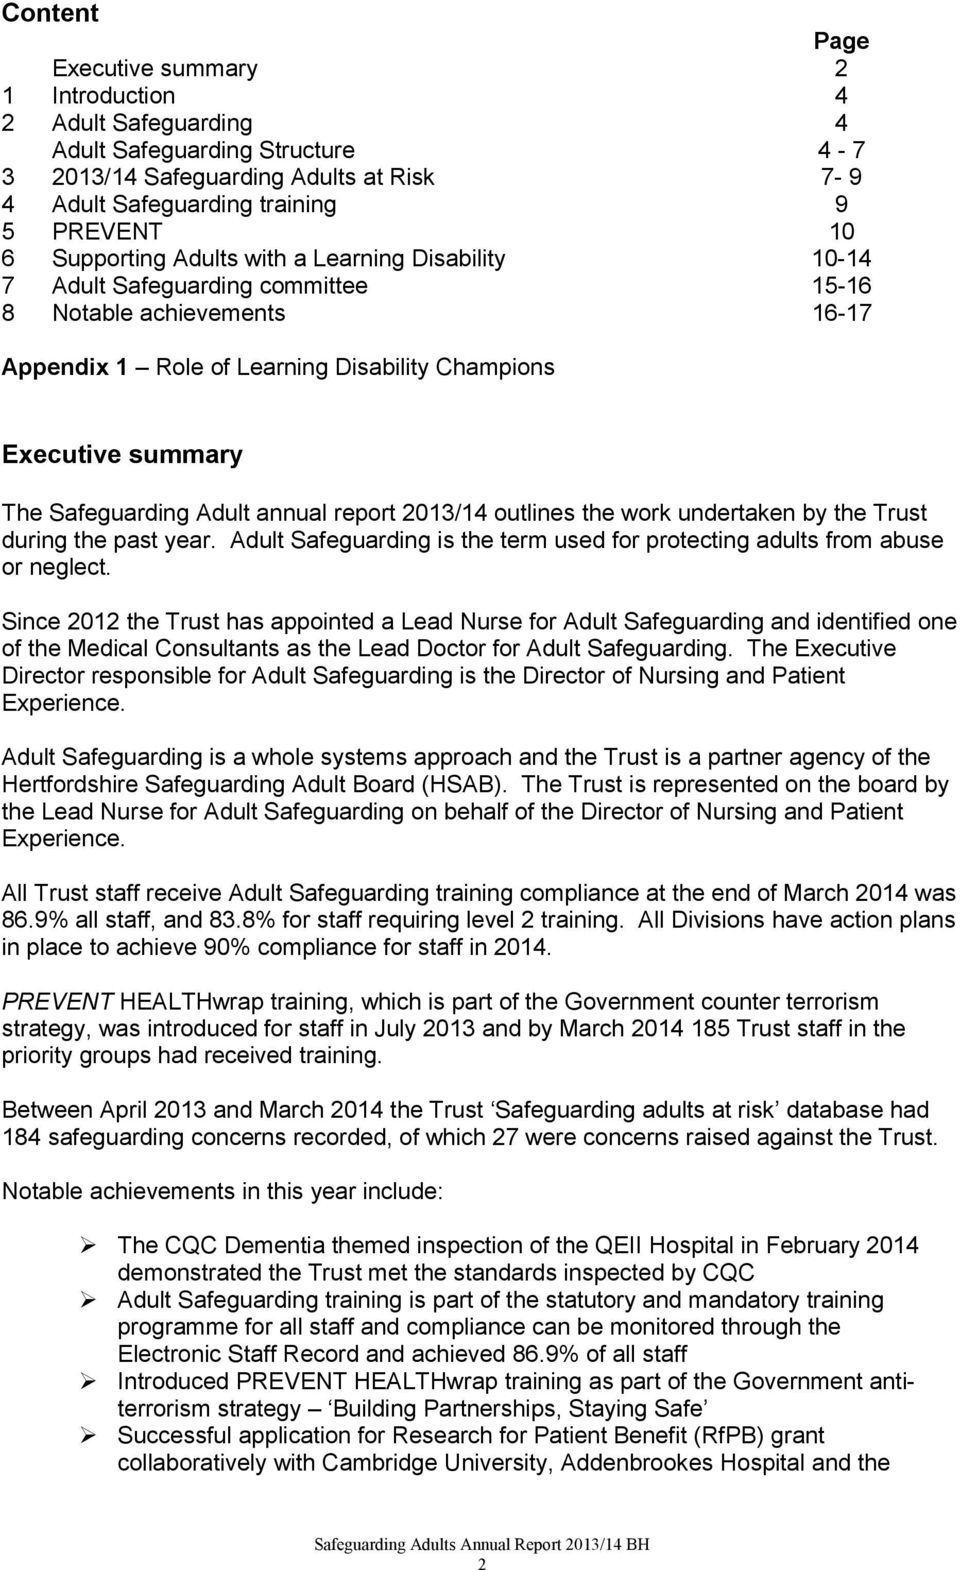 Safeguarding Adult annual report 2013/14 outlines the work undertaken by the Trust during the past year. Adult Safeguarding is the term used for protecting adults from abuse or neglect.